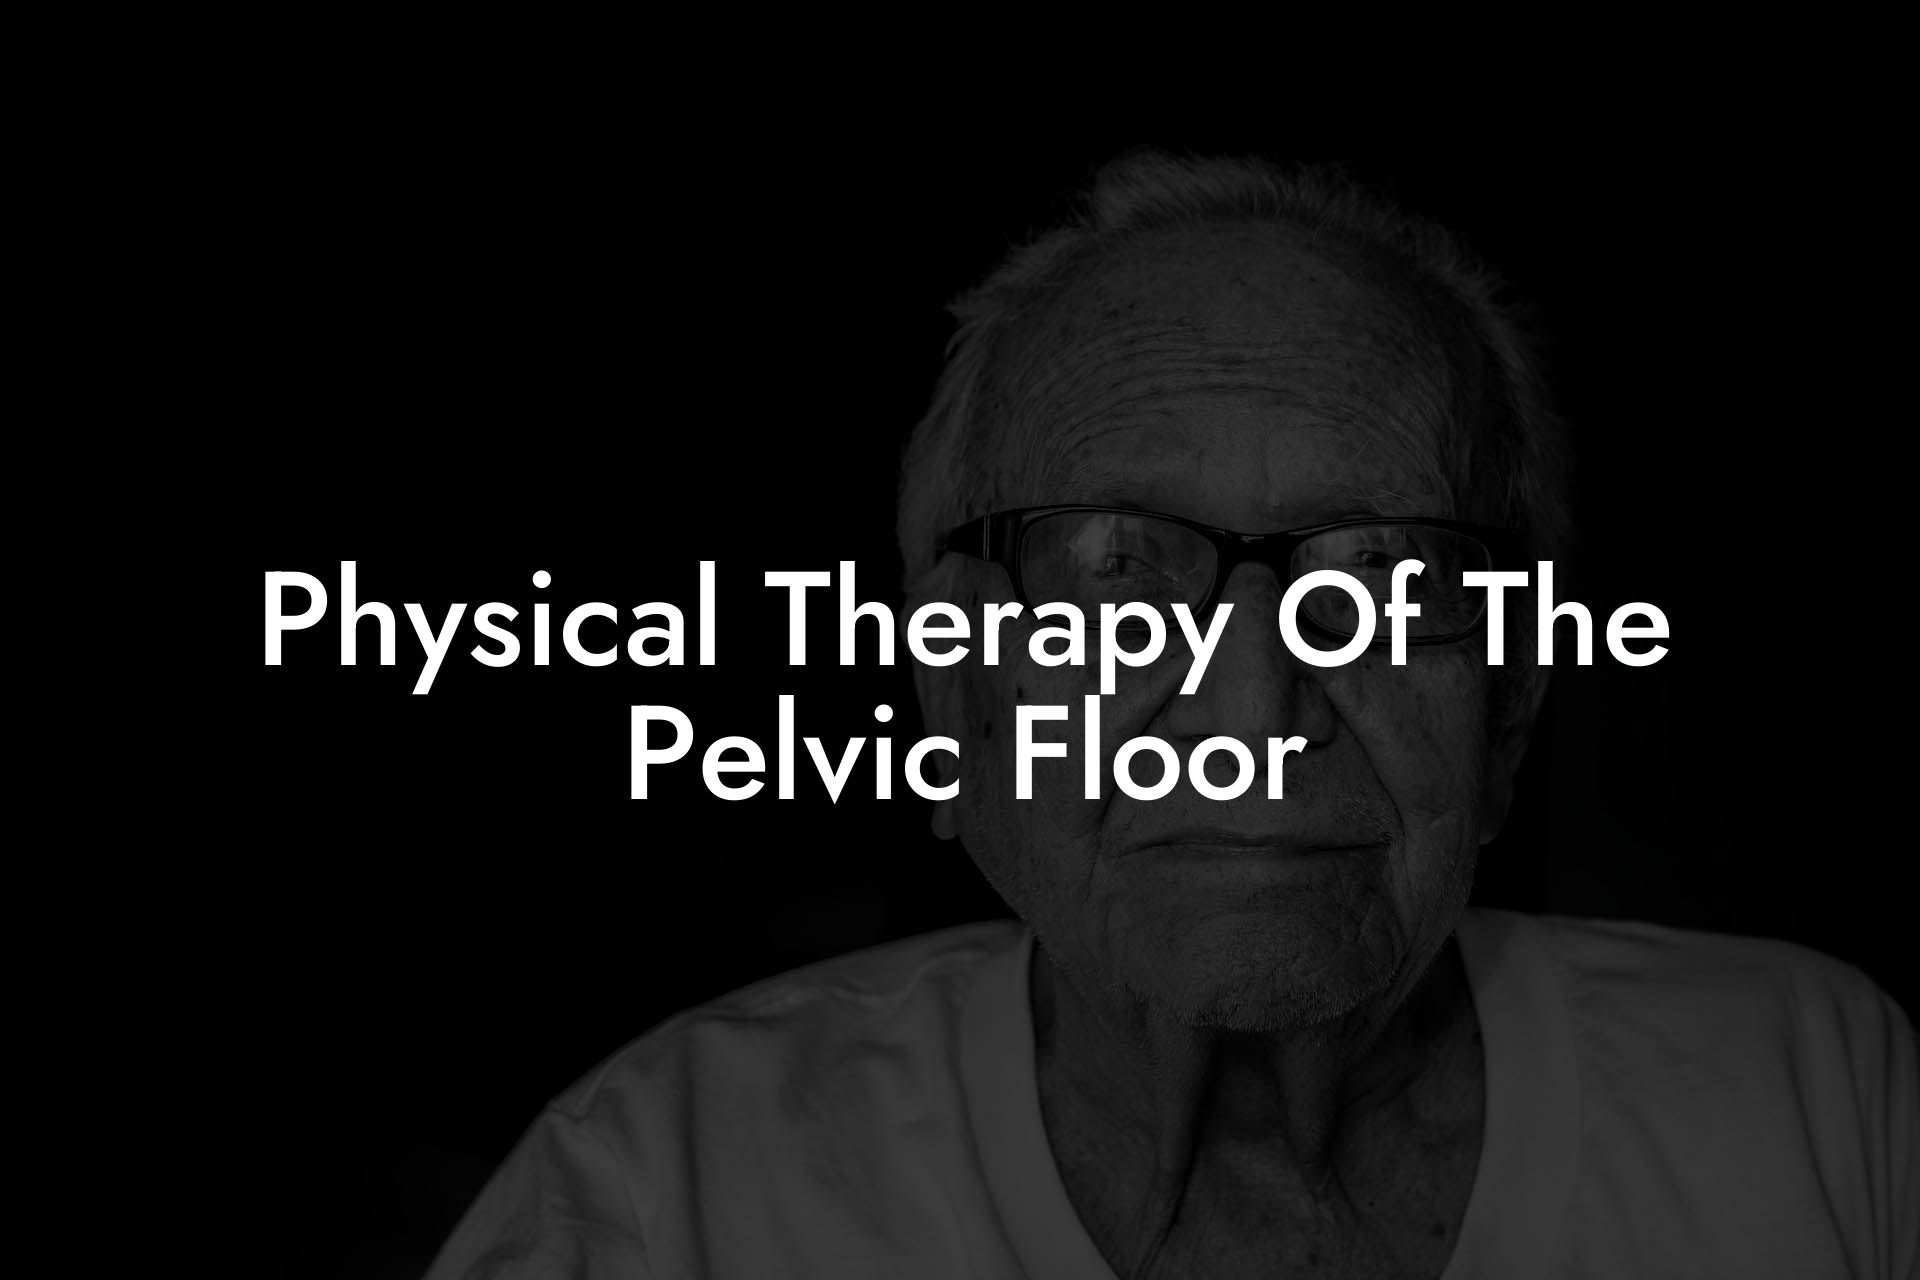 Physical Therapy Of The Pelvic Floor